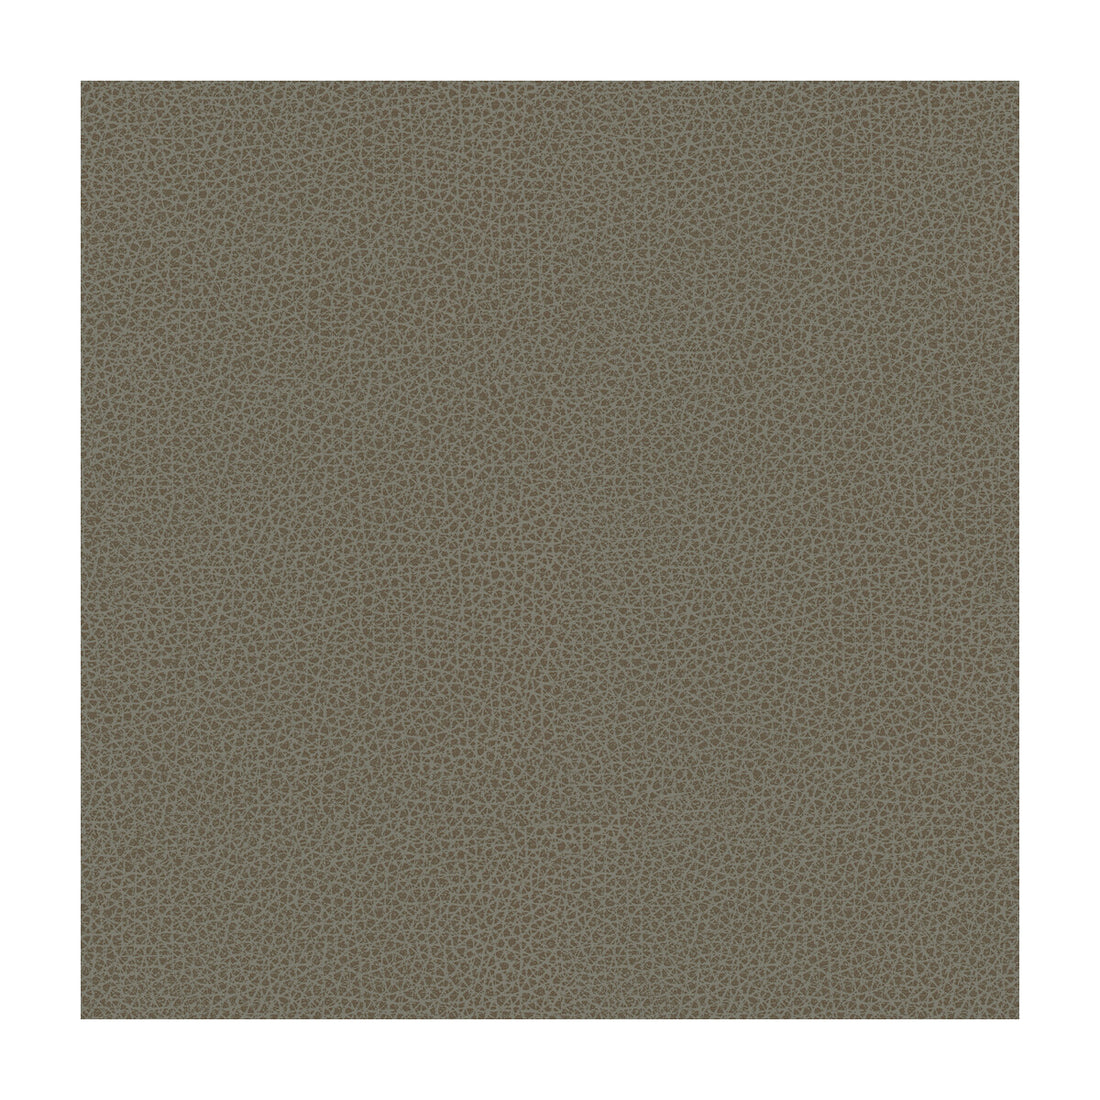 Kravet Contract fabric in bess-11 color - pattern BESS.11.0 - by Kravet Contract